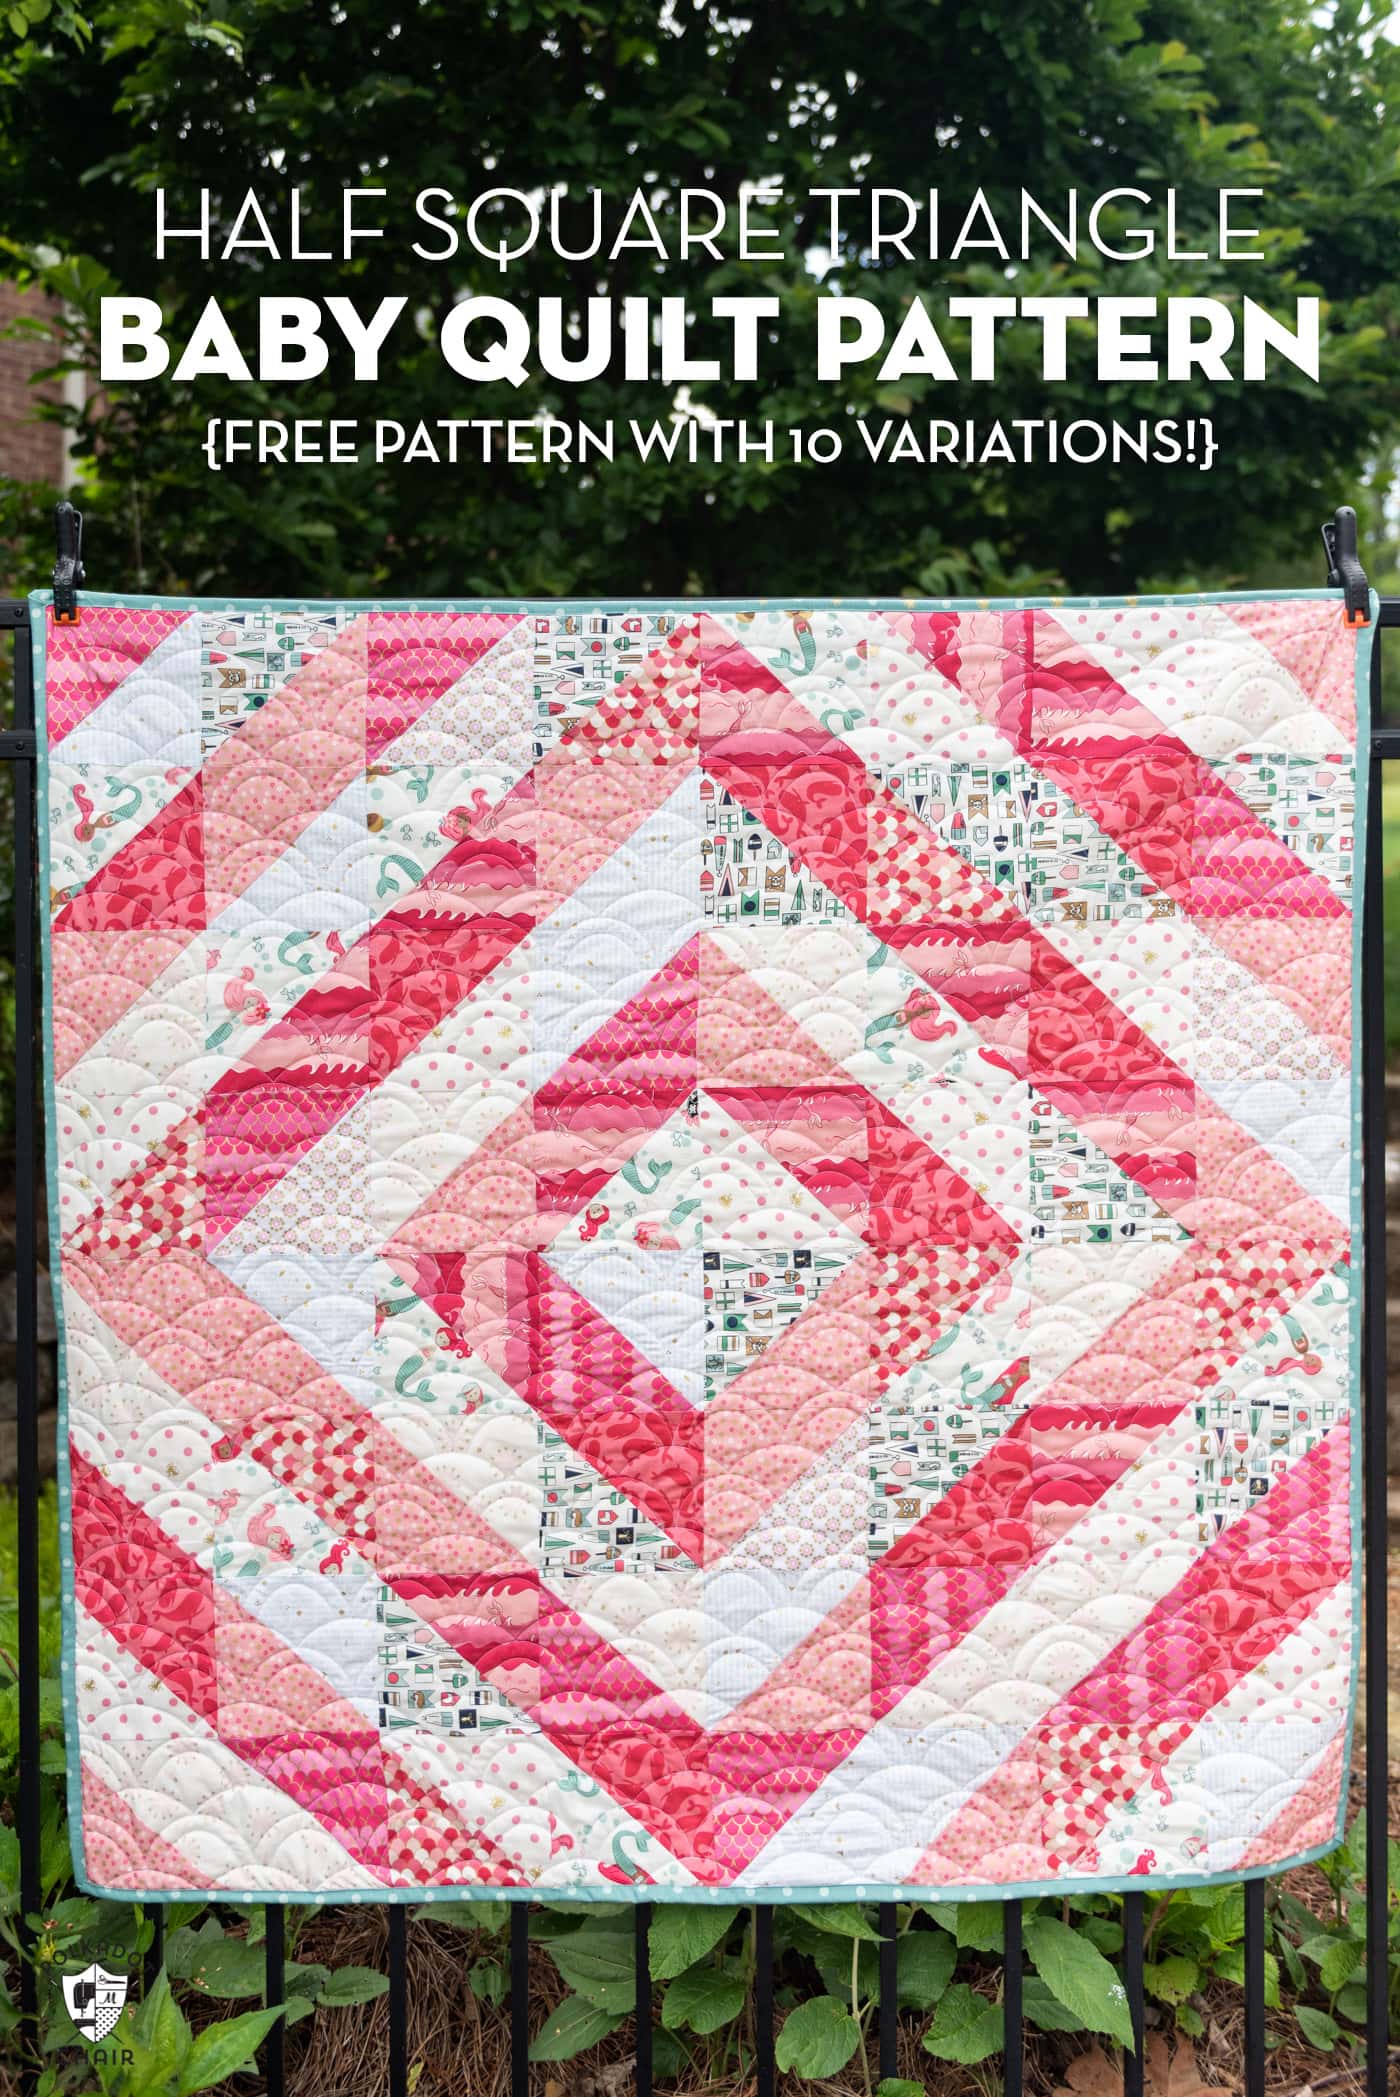 Half Square Triangle Quilt Layouts & Free Baby Quilt Pattern